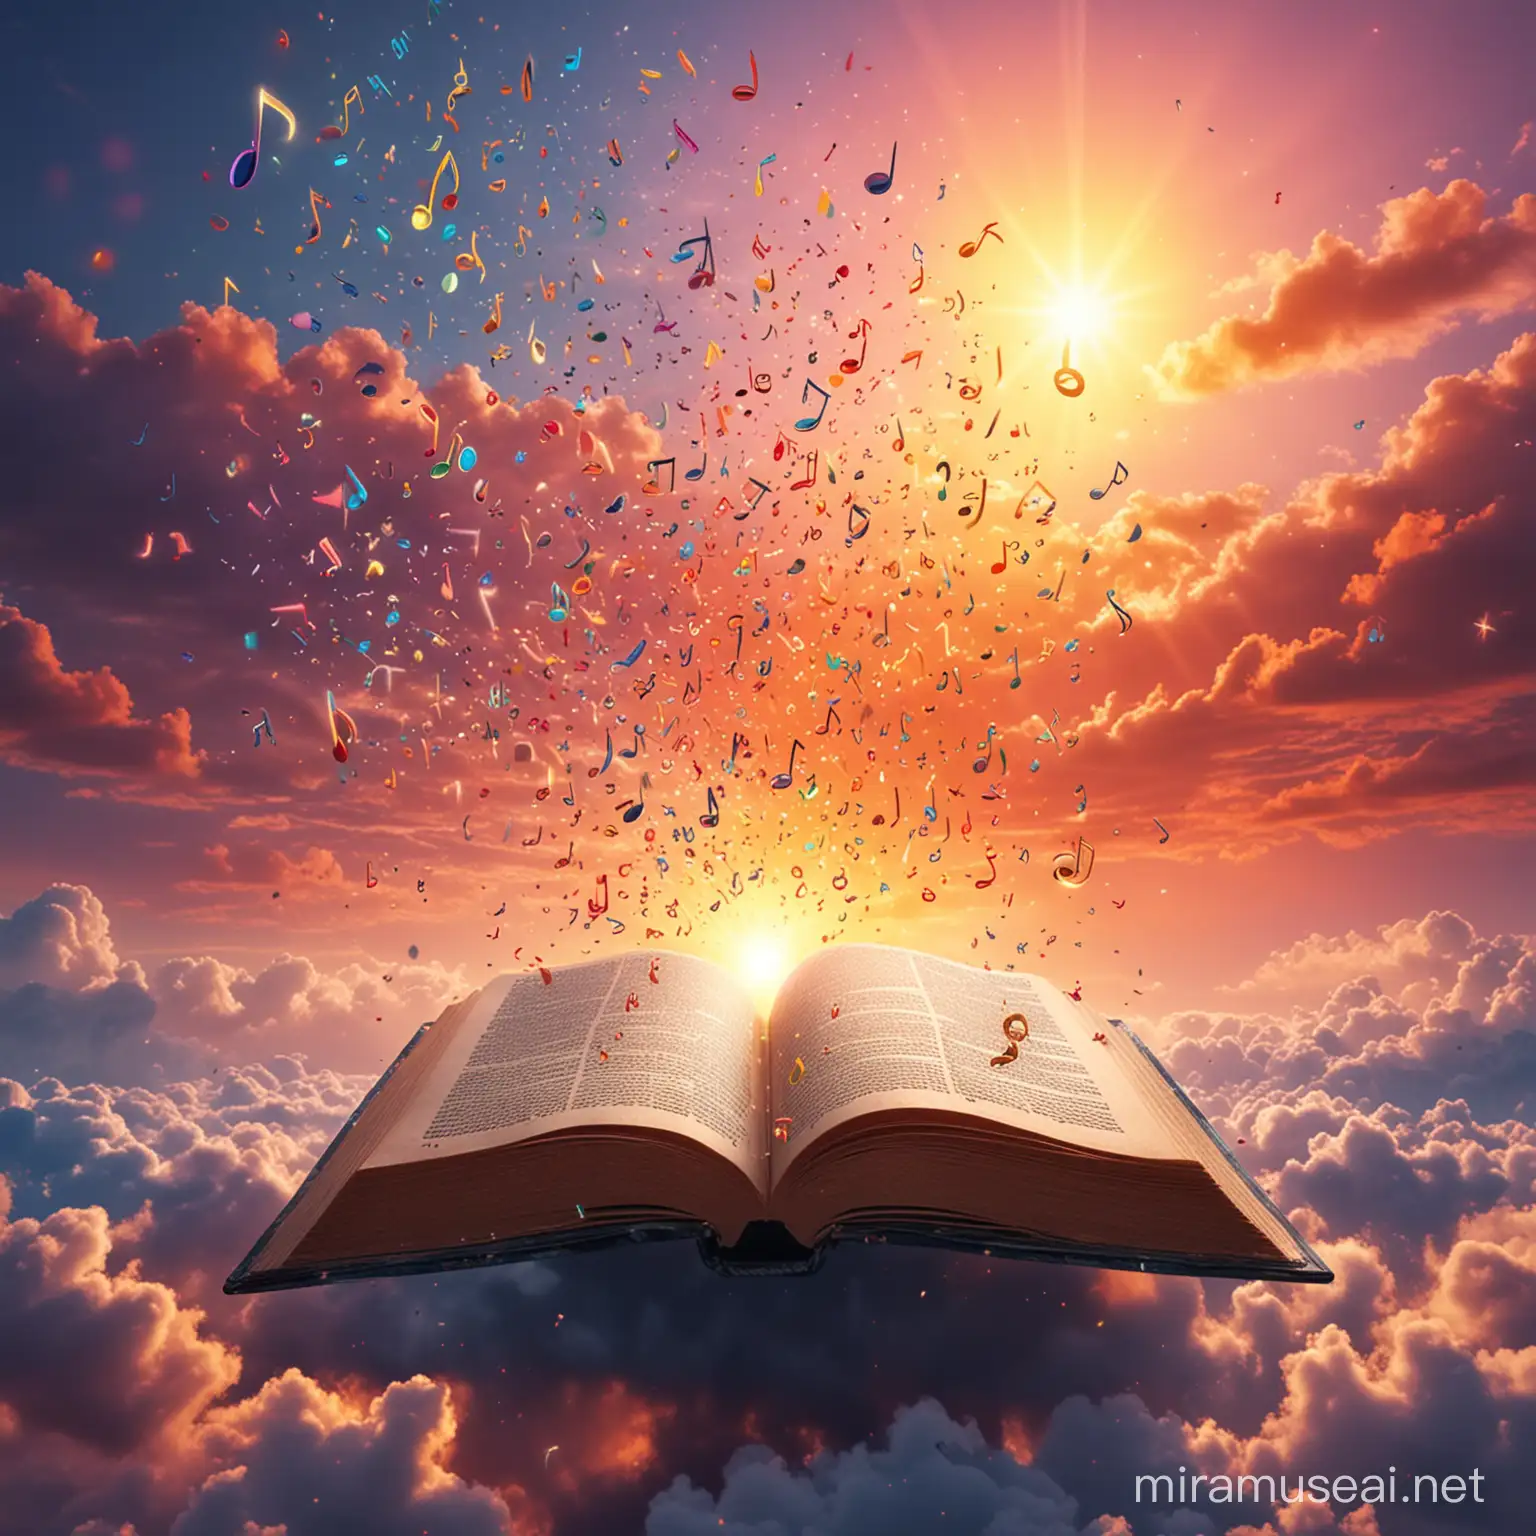 colorful Sunrise with musical notes floating all around the sky coming out of a magical book

